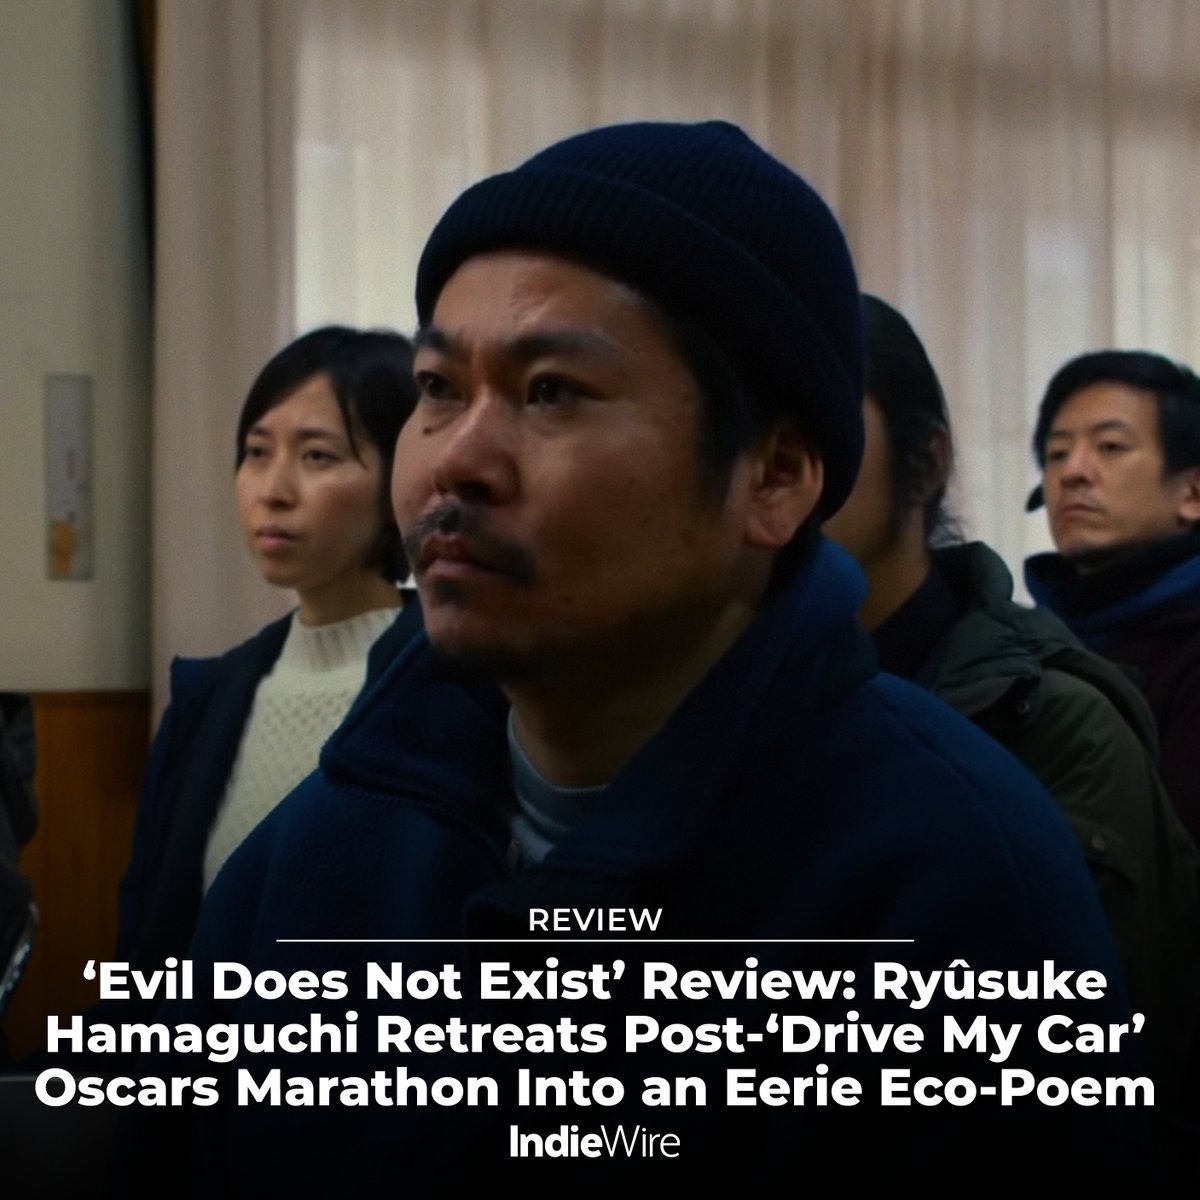 Oscar winner Ryûsuke Hamaguchi's made-in-secret 'Drive My Car' follow-up transports us to a rural village outside of Tokyo — and back to the director's roots. Read our review for 'Evil Does Not Exist': trib.al/80earXS